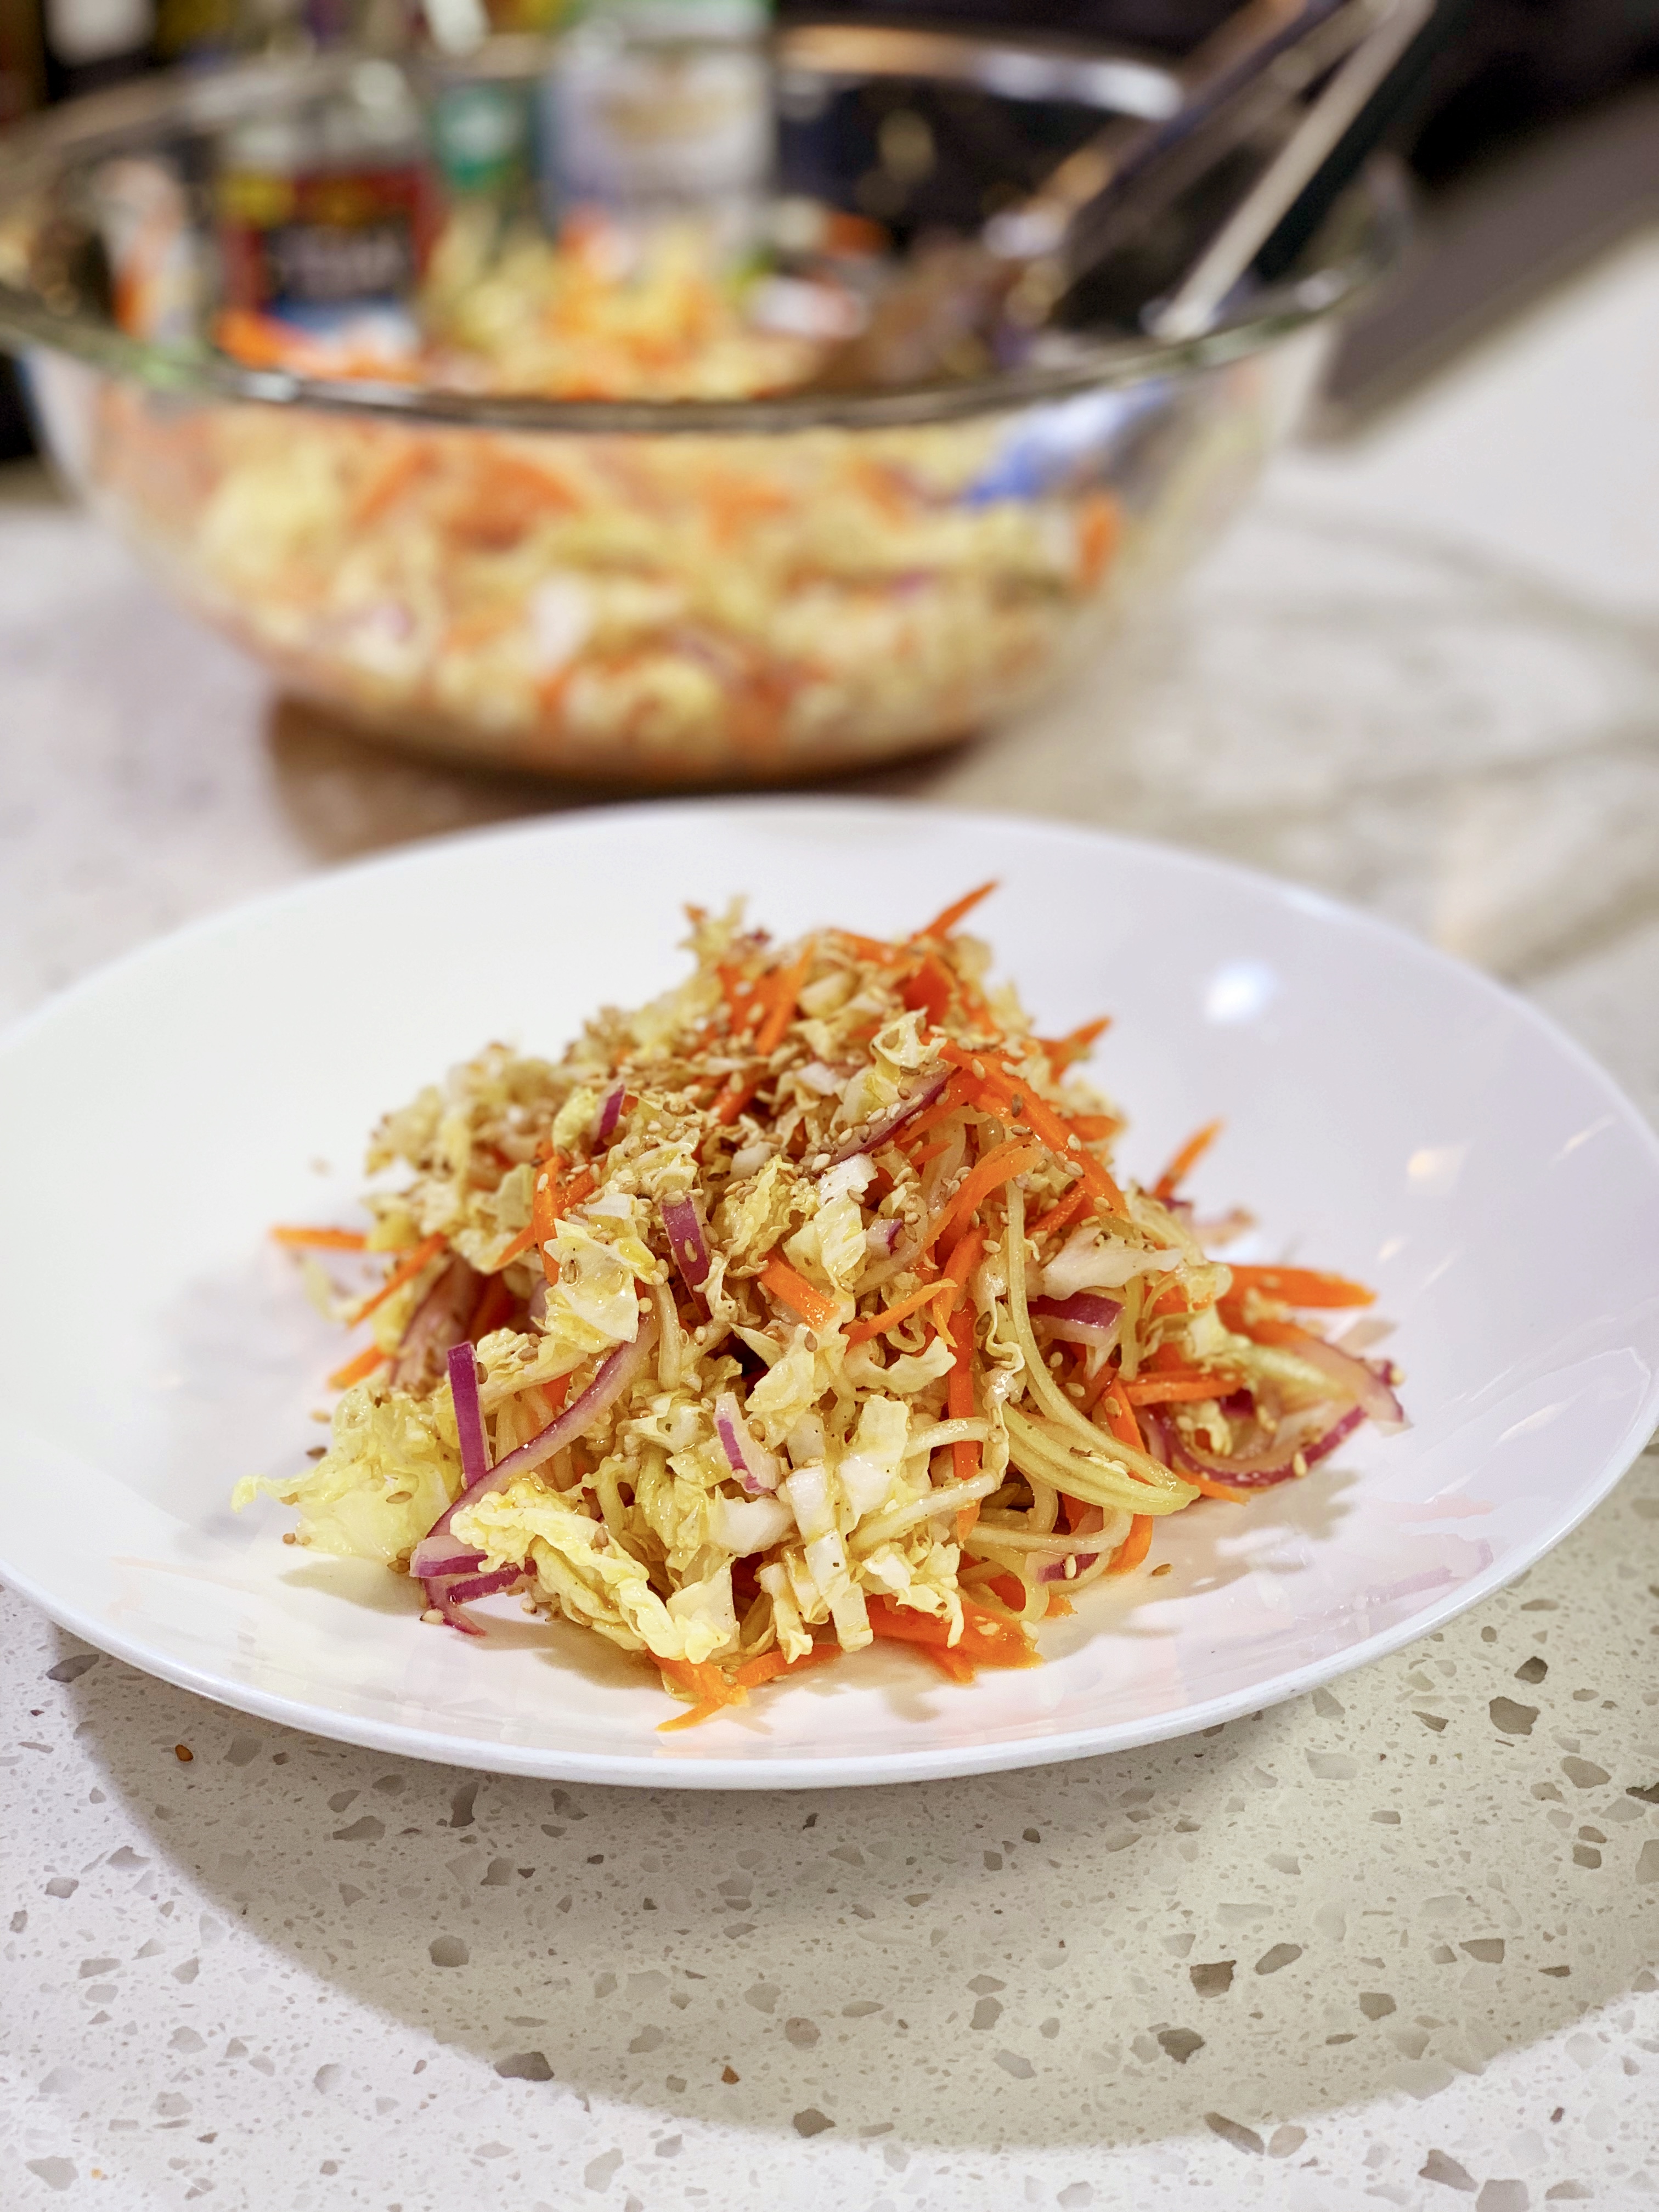 Bamboo Shoot Asian Salad - cooking with chef bryan